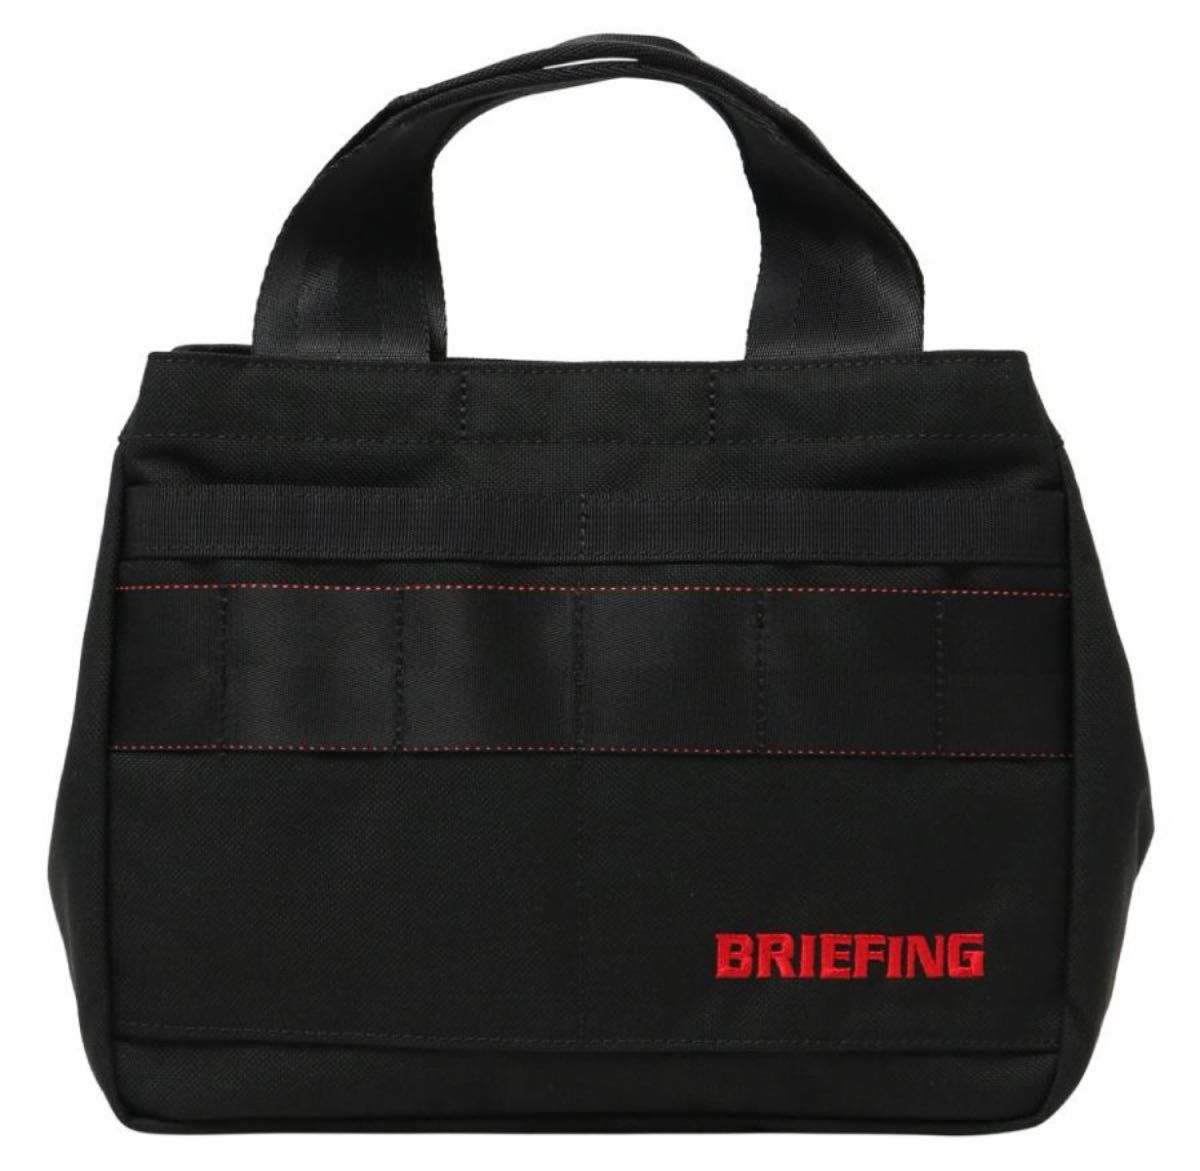 BRIEFING カートバッグ CLASSIC CART TOTE TL Yahoo!フリマ（旧）-